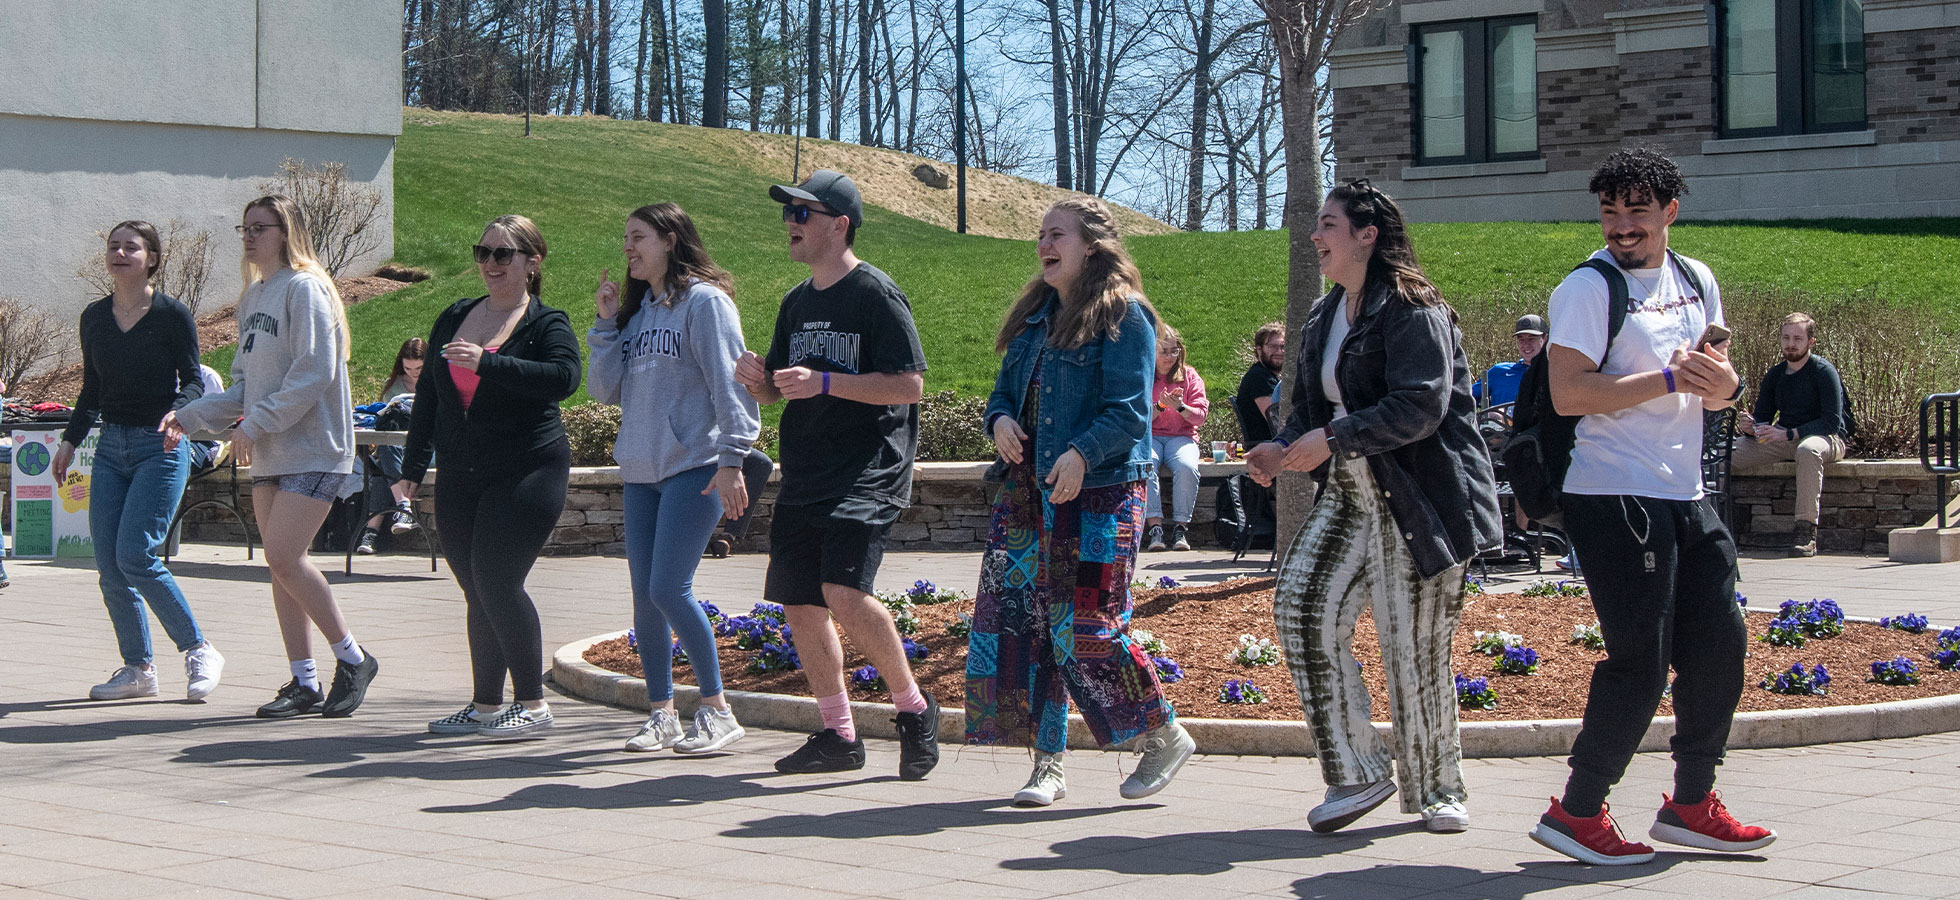 Assumption University students in Worcester, Massachusetts celebrating Earth Day by dancing.